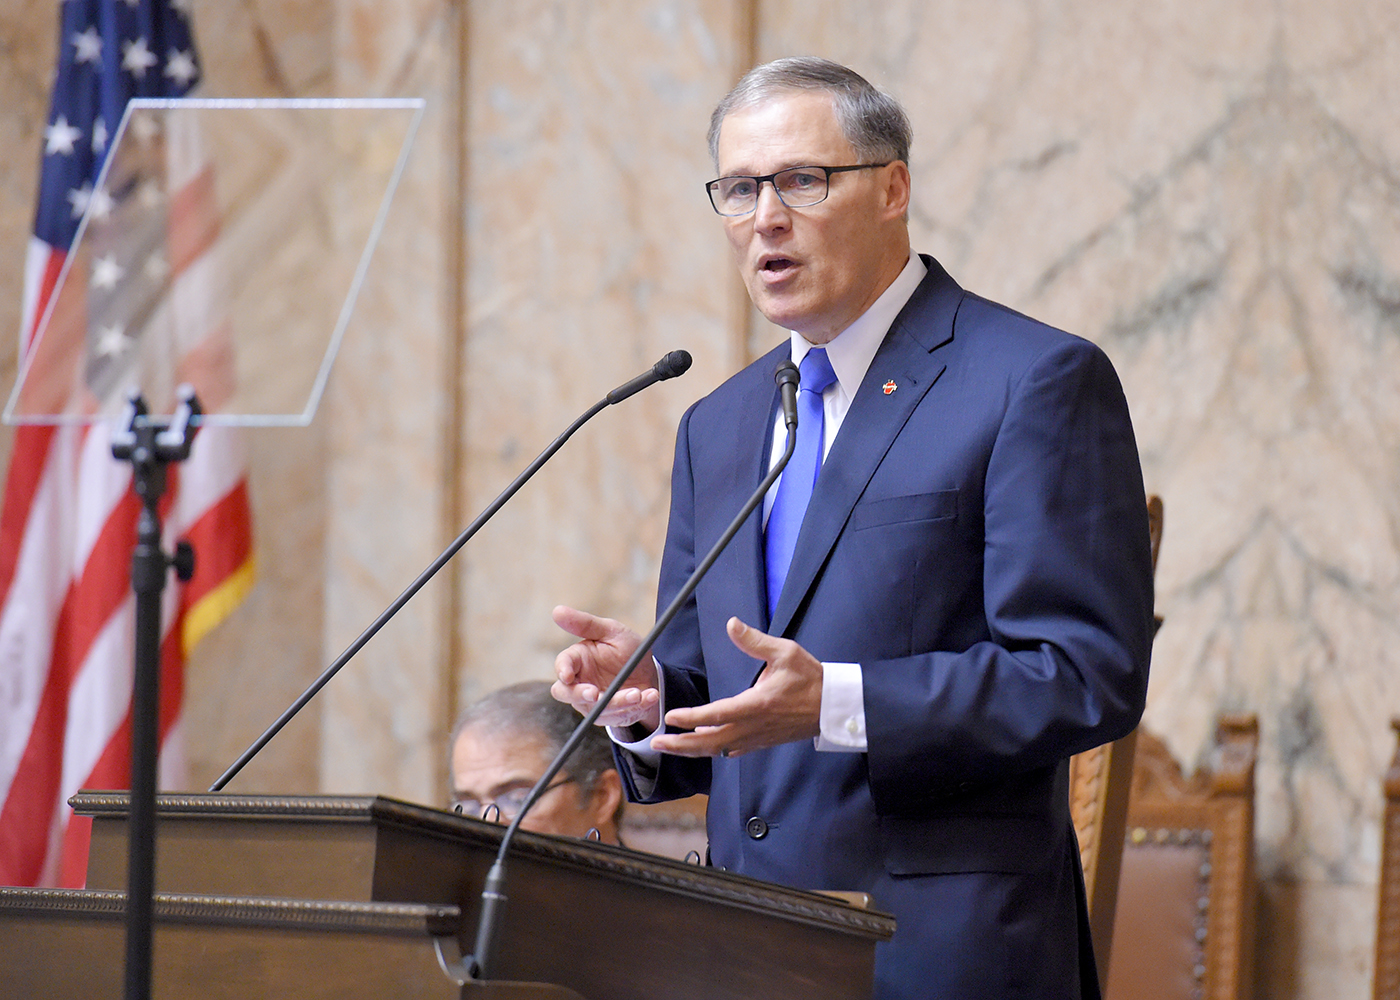 Governor Inslee delivers the State of the State address